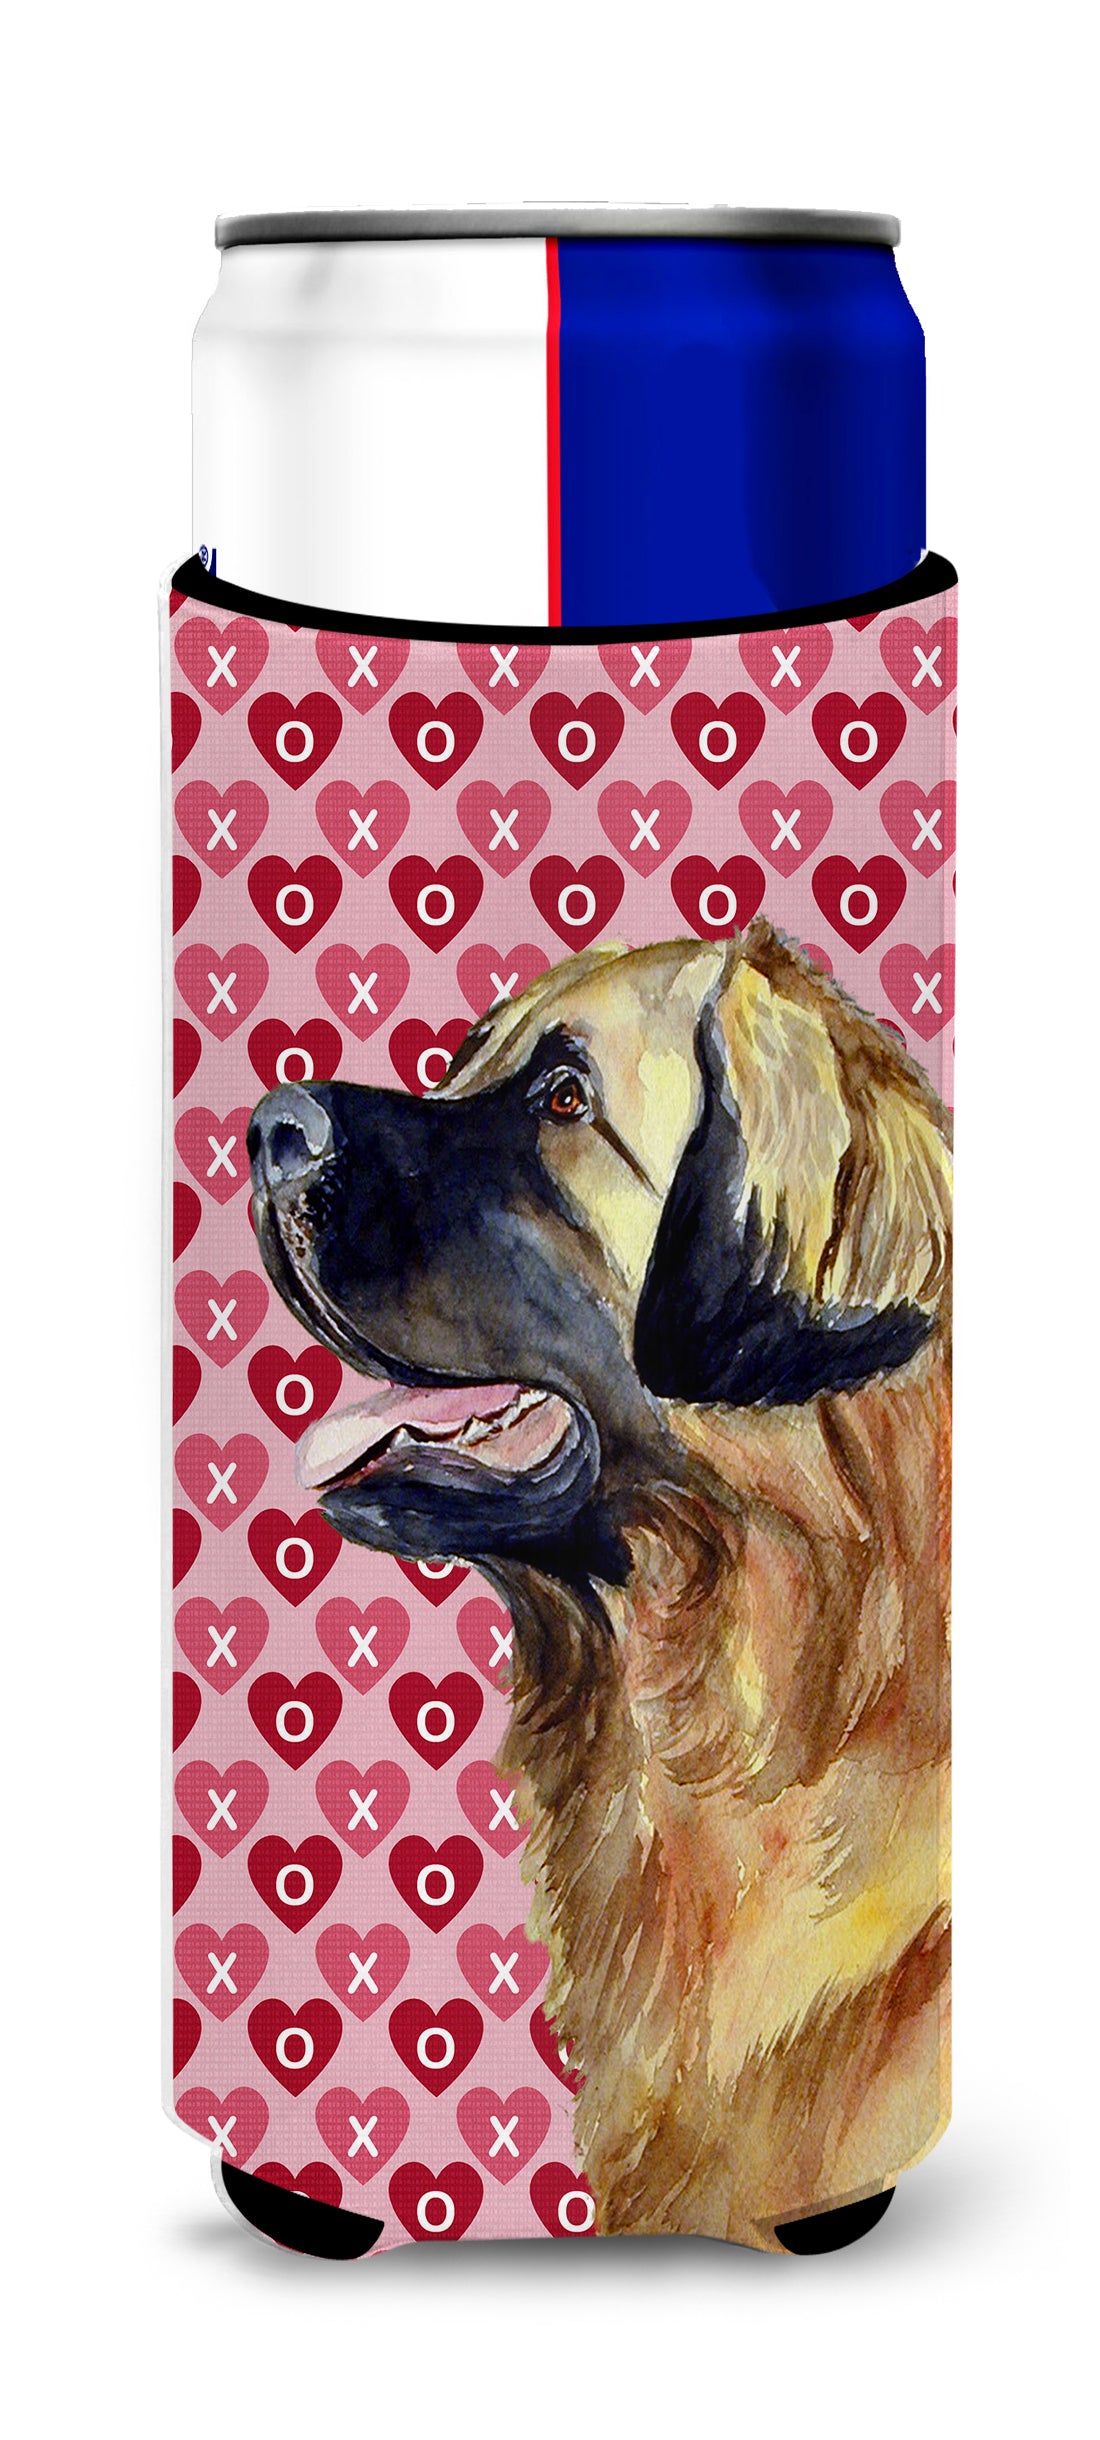 Leonberger Hearts Love and Valentine's Day Portrait Ultra Beverage Insulators for slim cans LH9168MUK